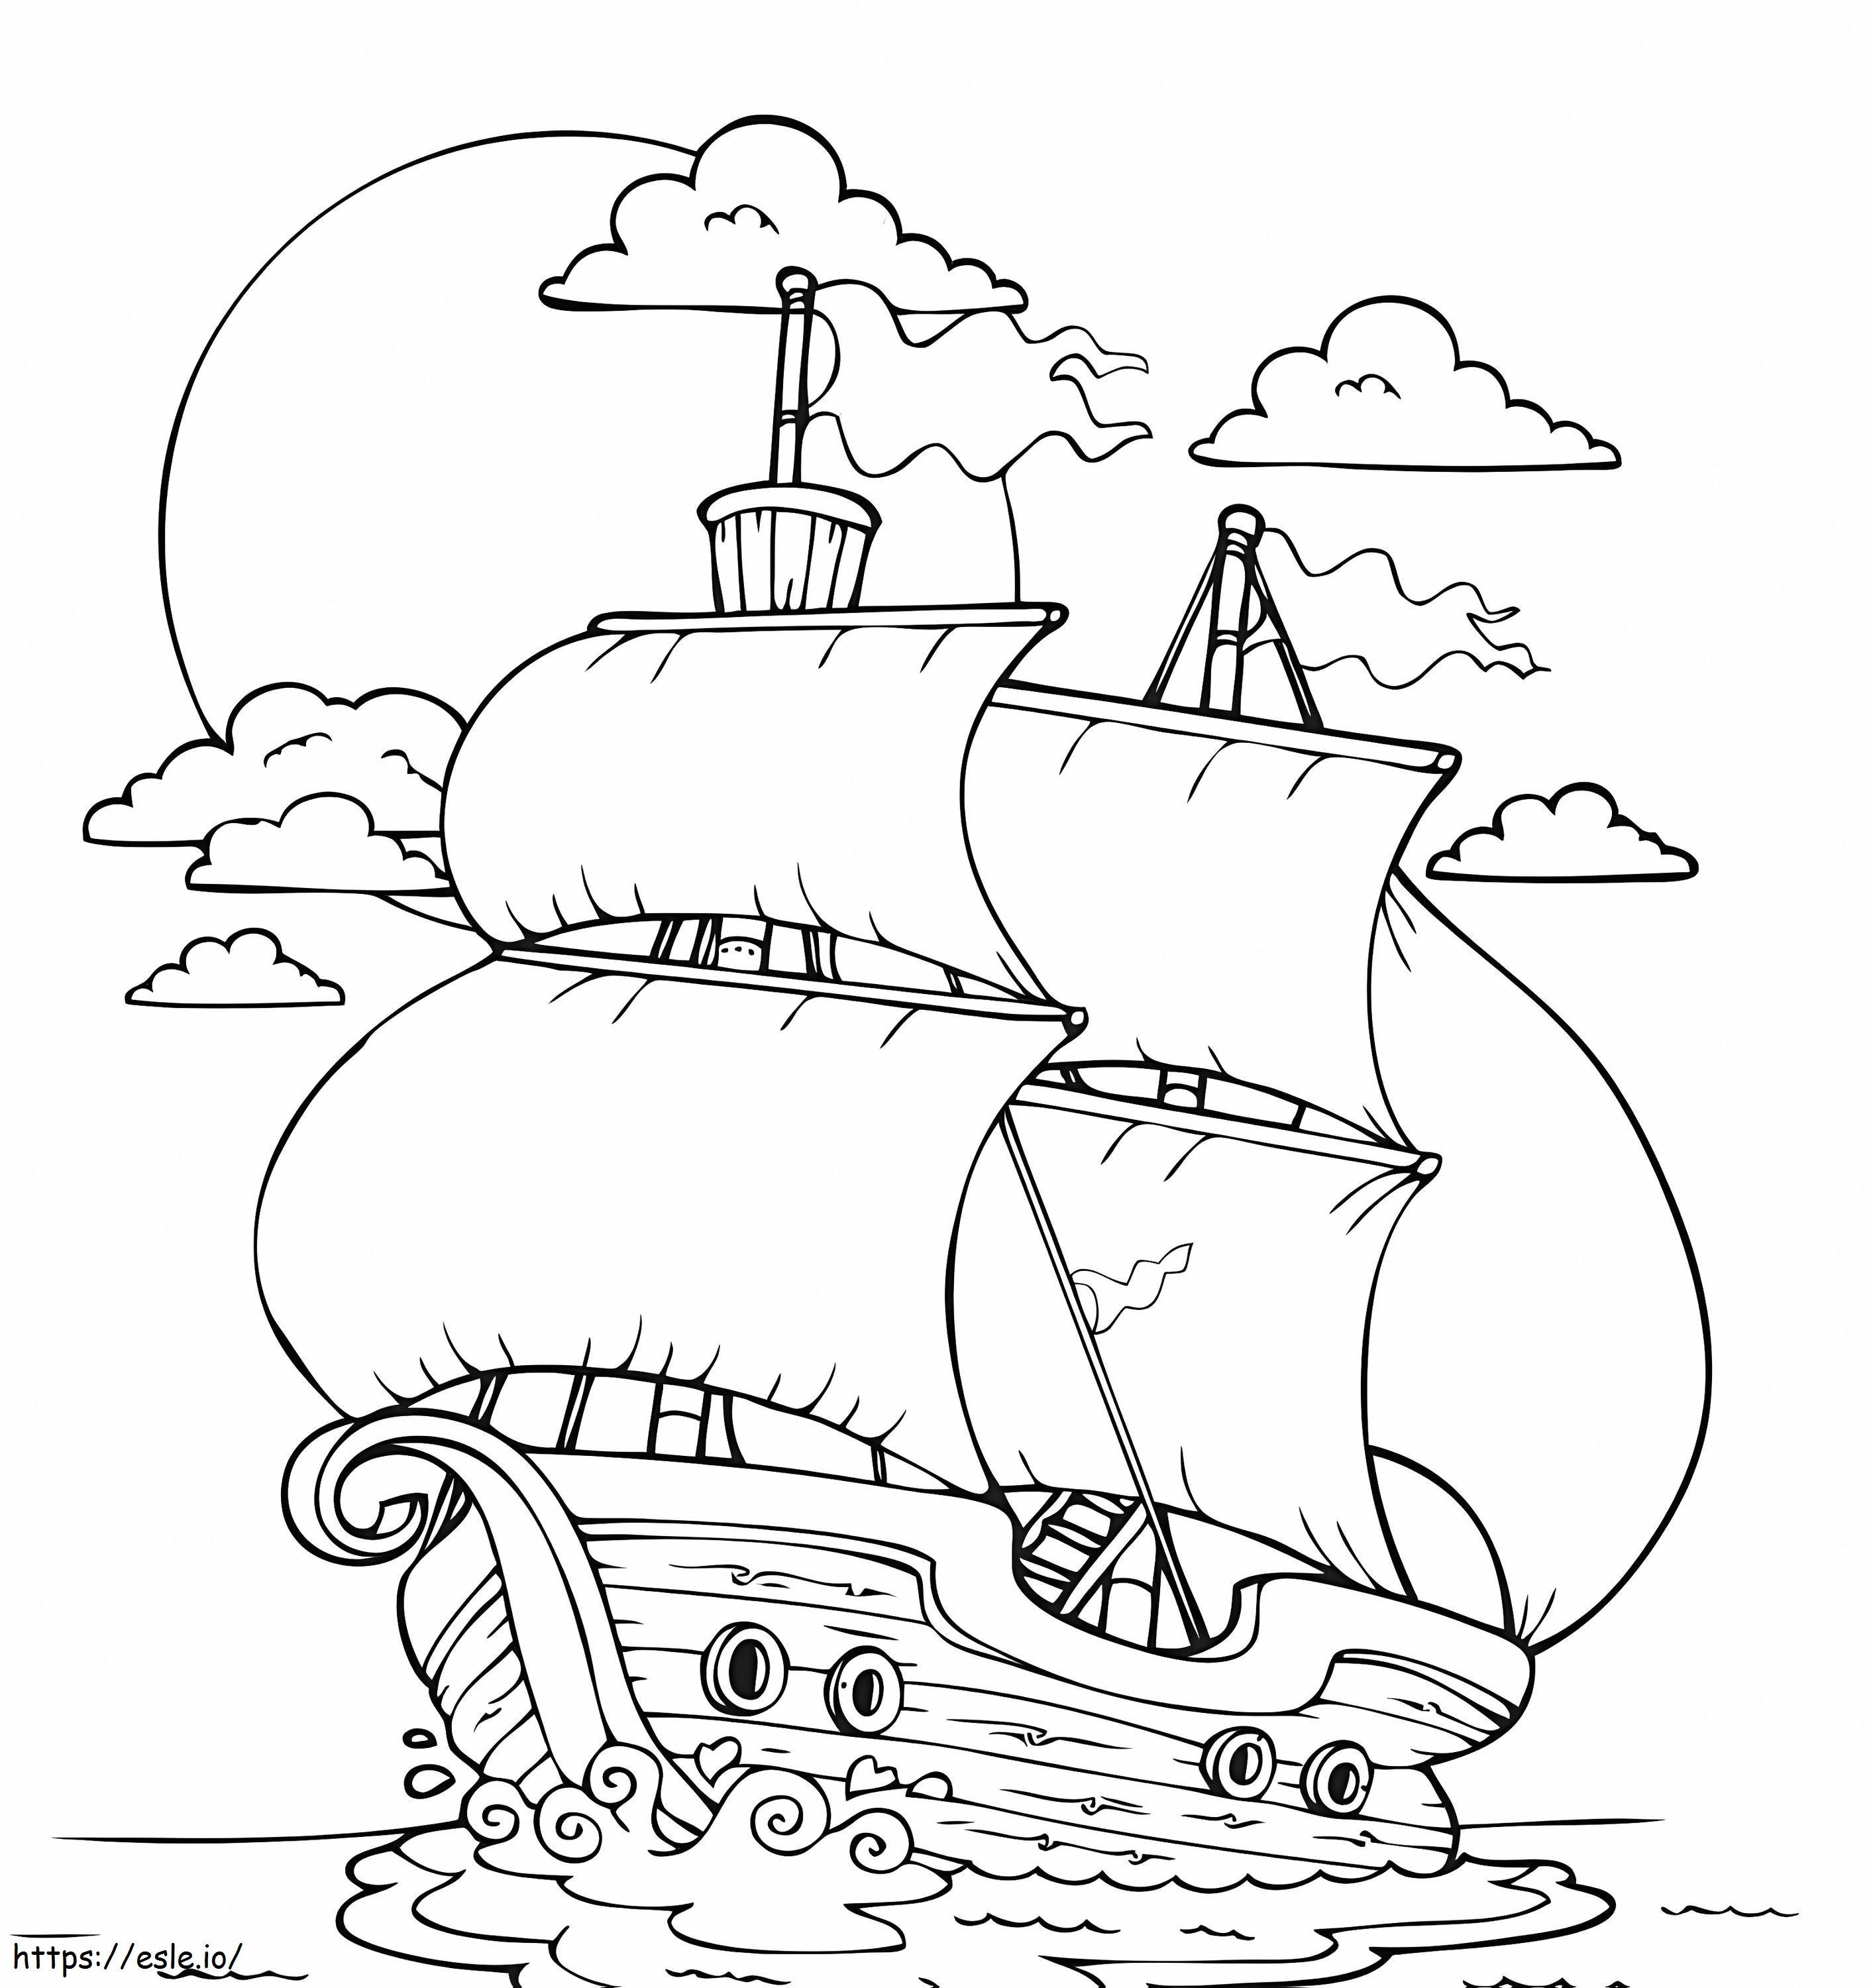 Free Printable Mayflower coloring page